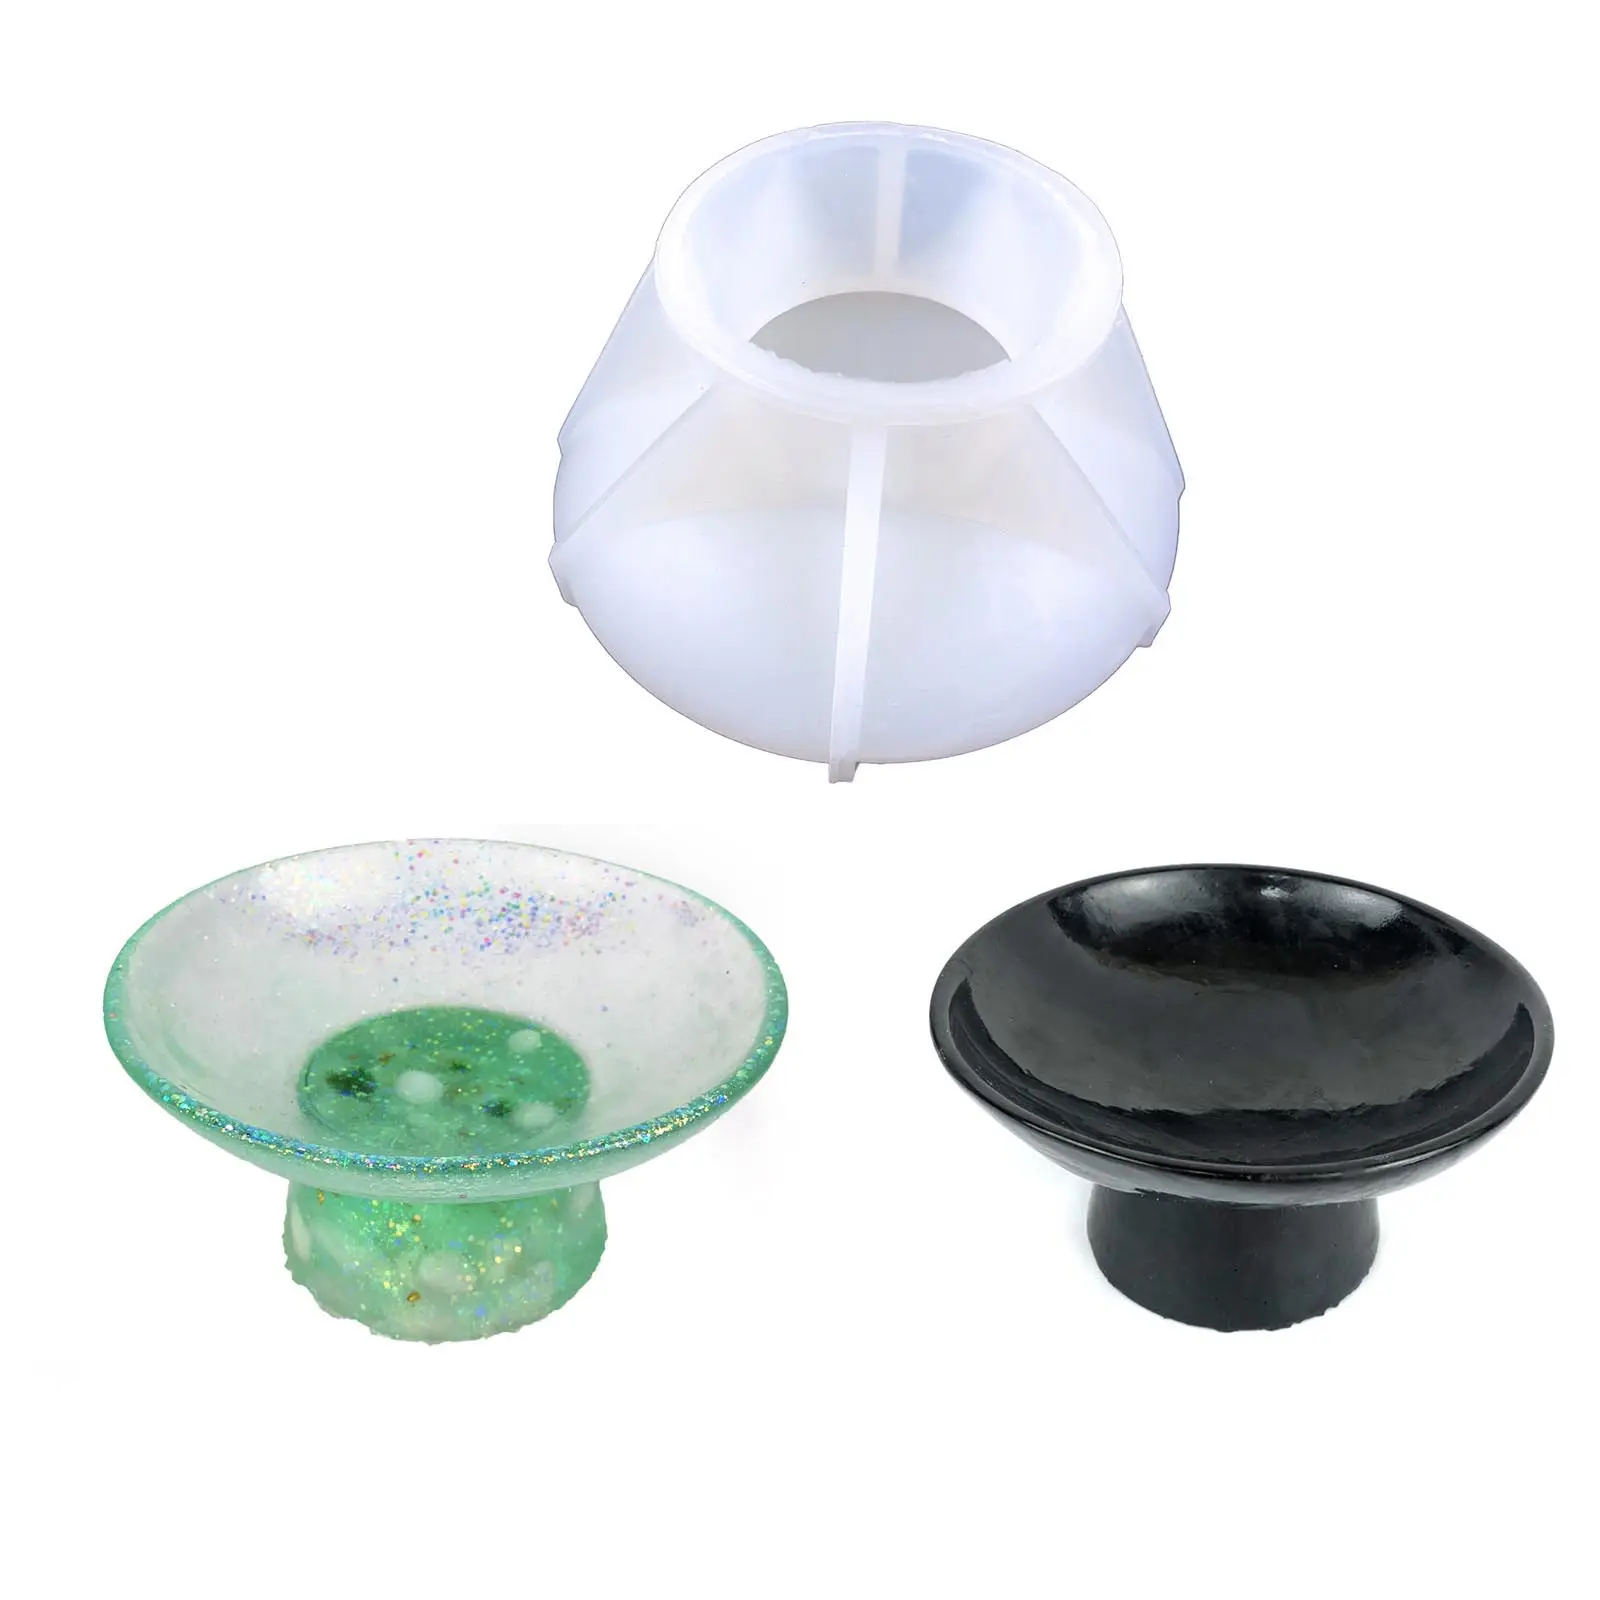 DIY Silicone Jewelry Resin Mold Dishes Plate Model Making Casting Mold Jewelry Craft Mould Tool